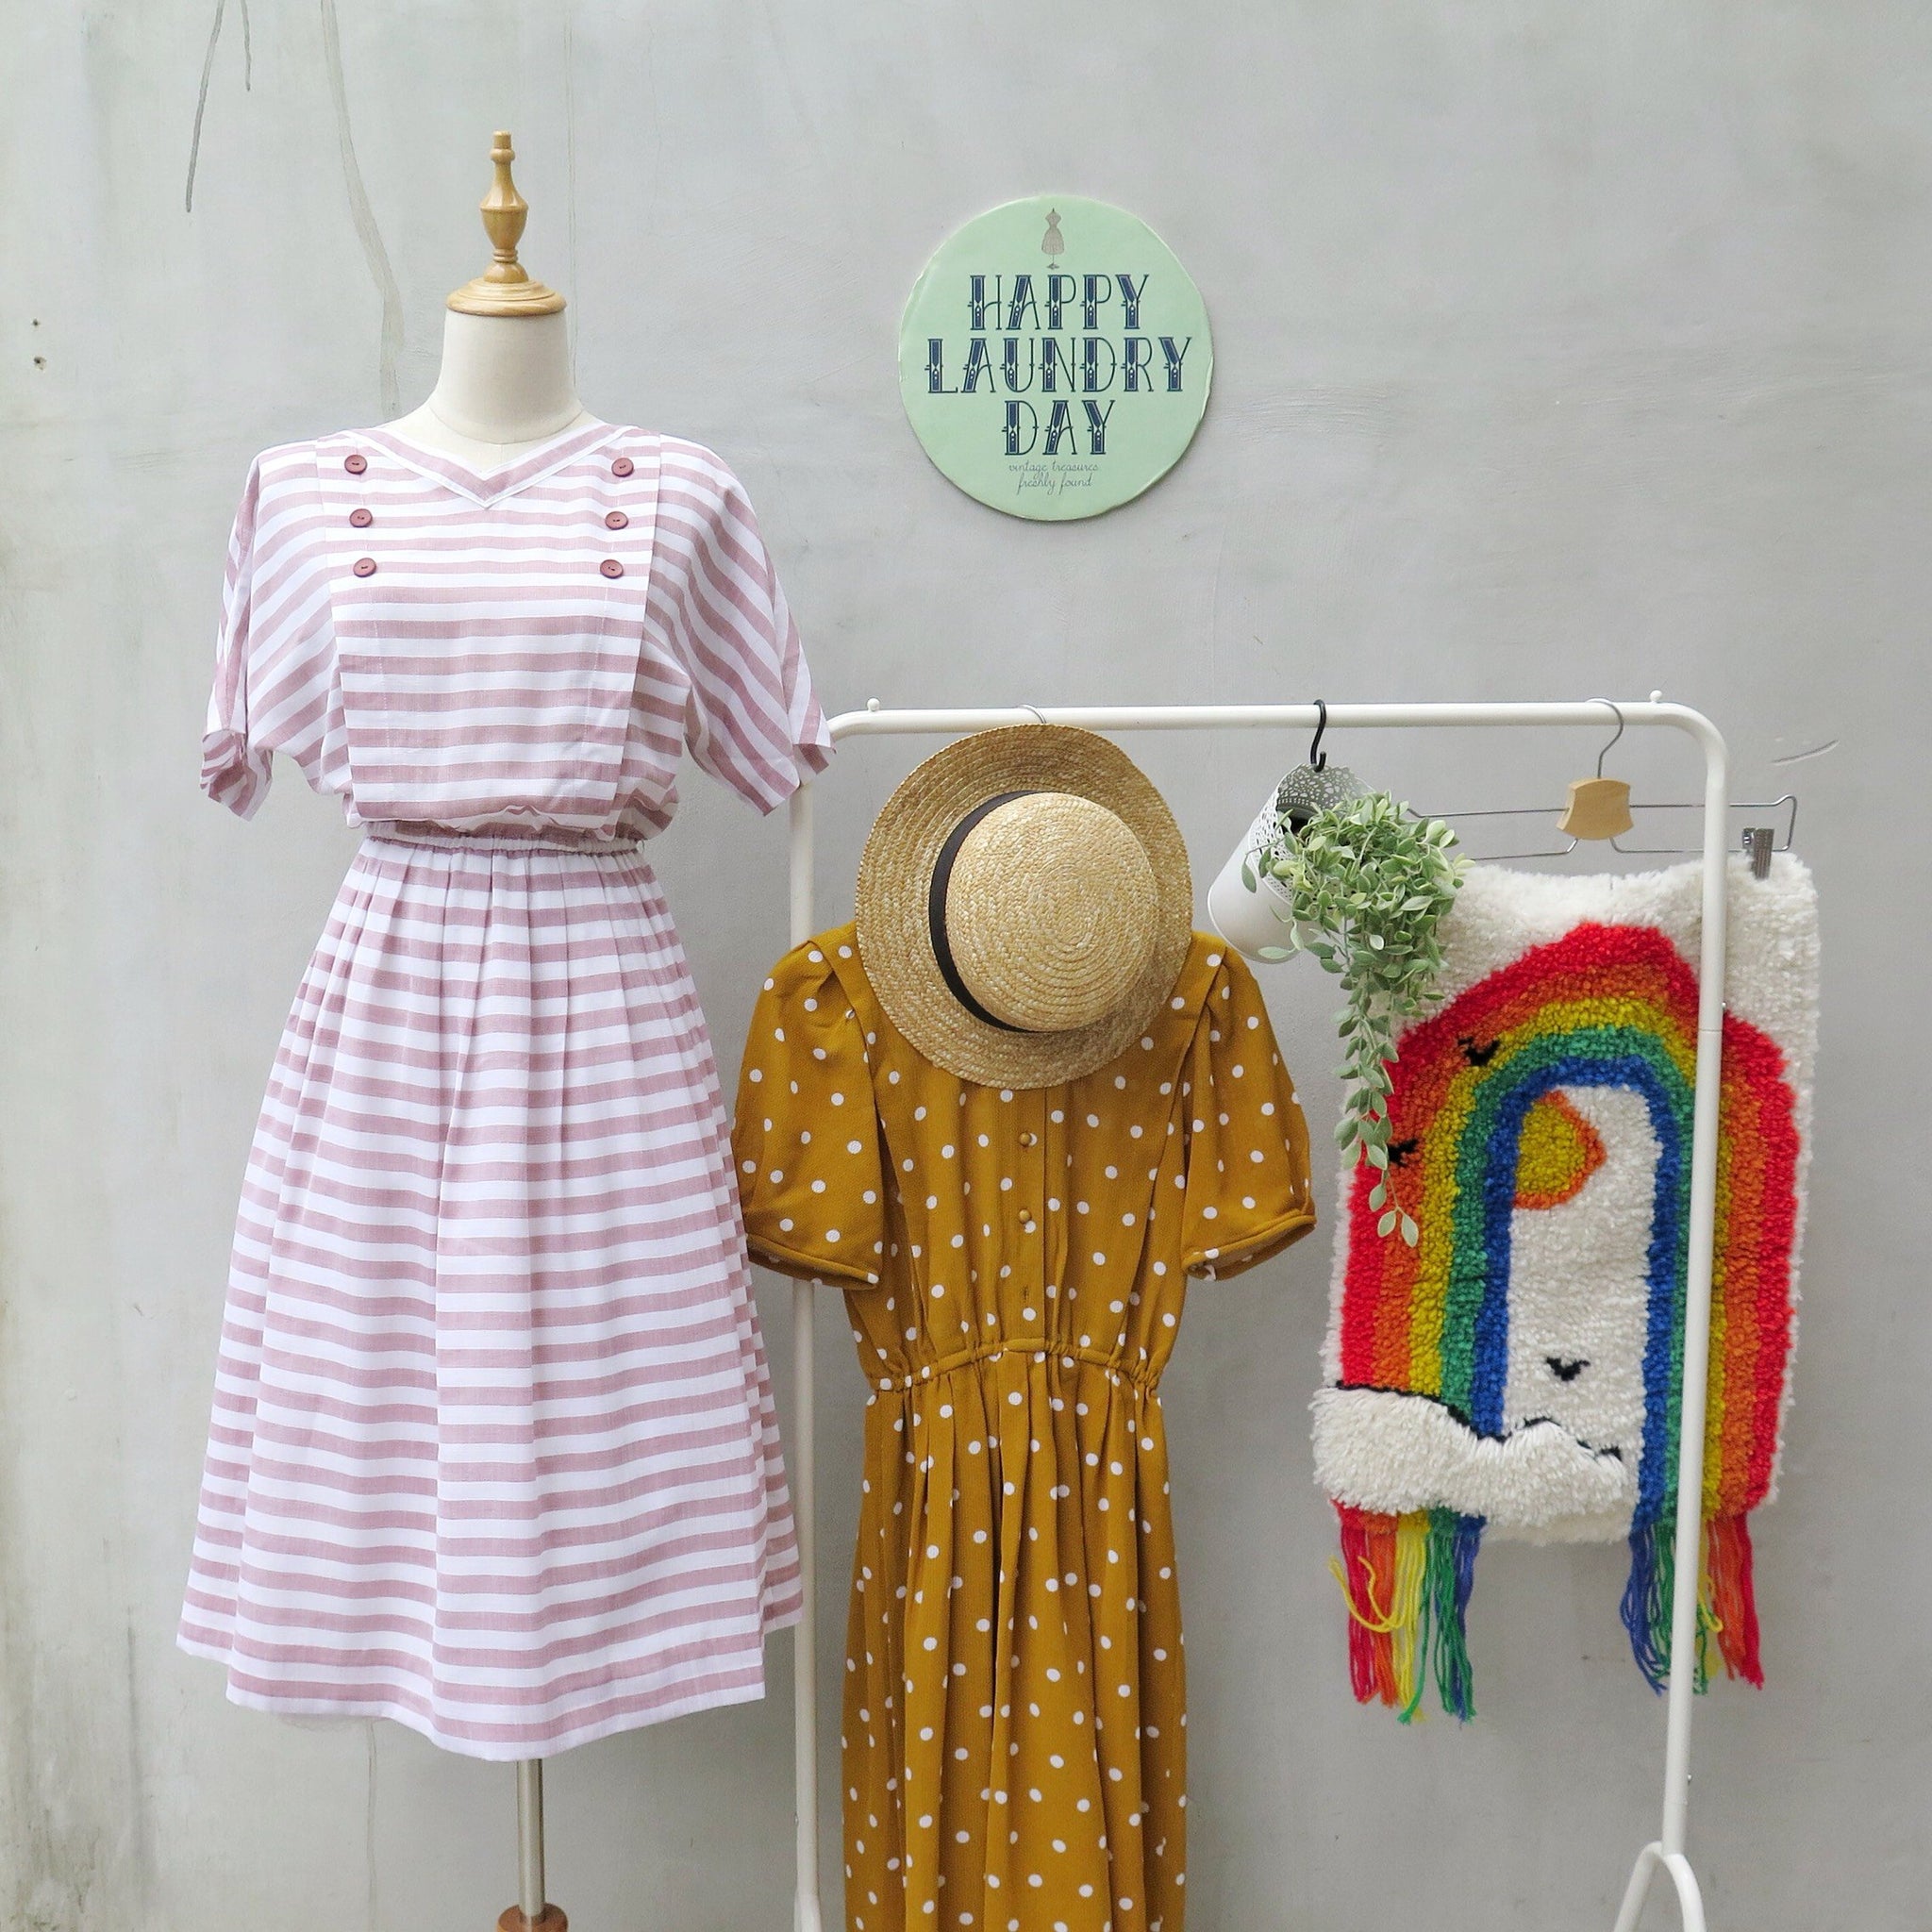 Happy Laundry Day Vintage - A vintage clothing and accessories shop